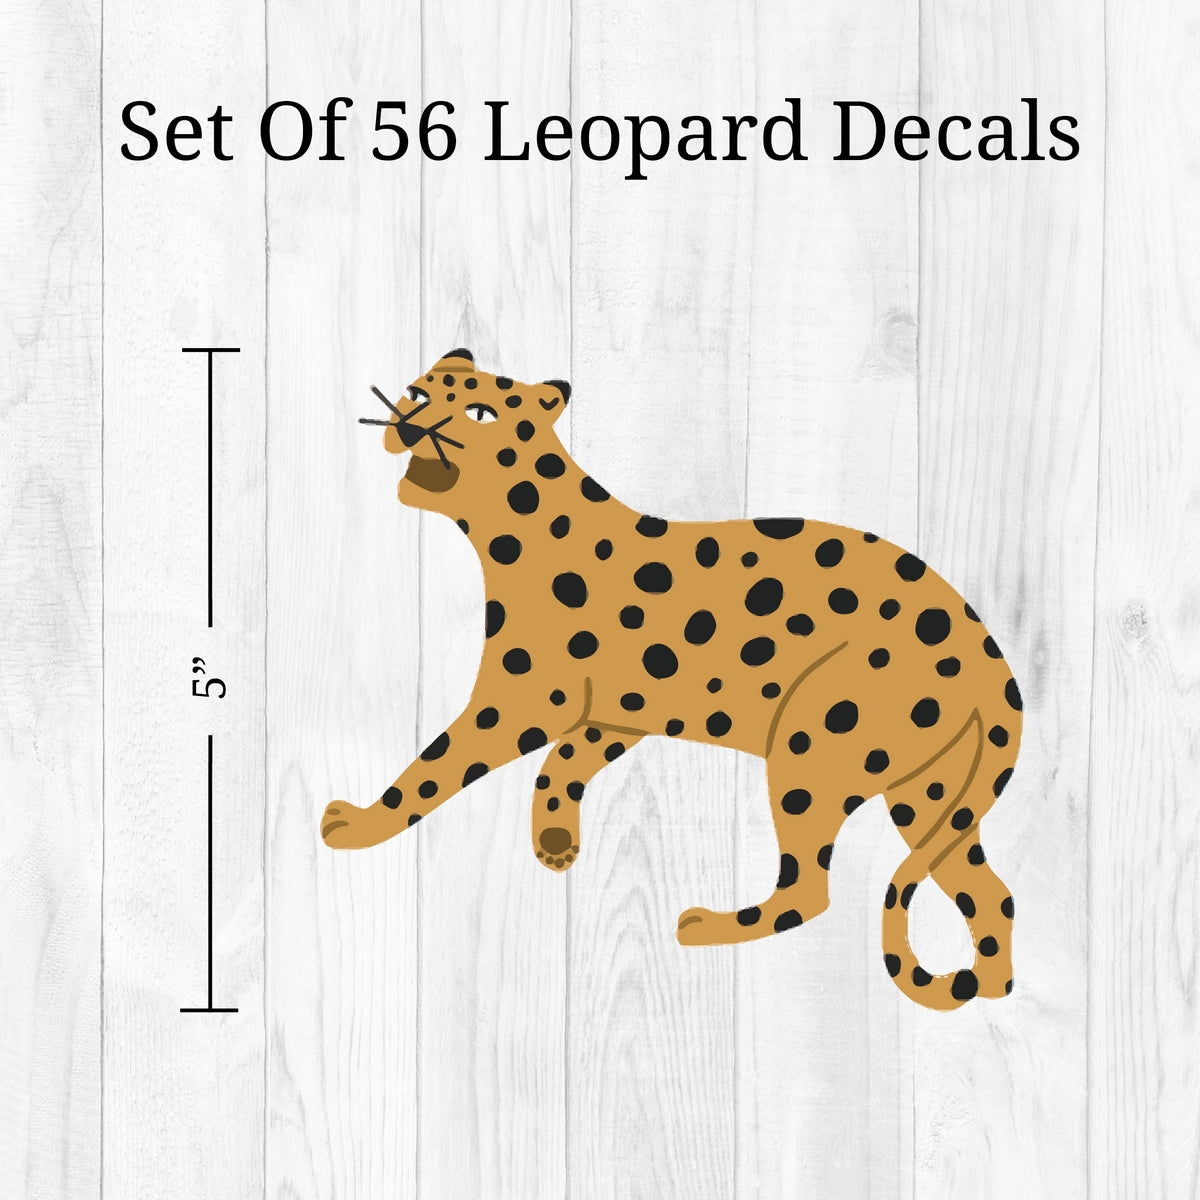 Leopards Wall Decals